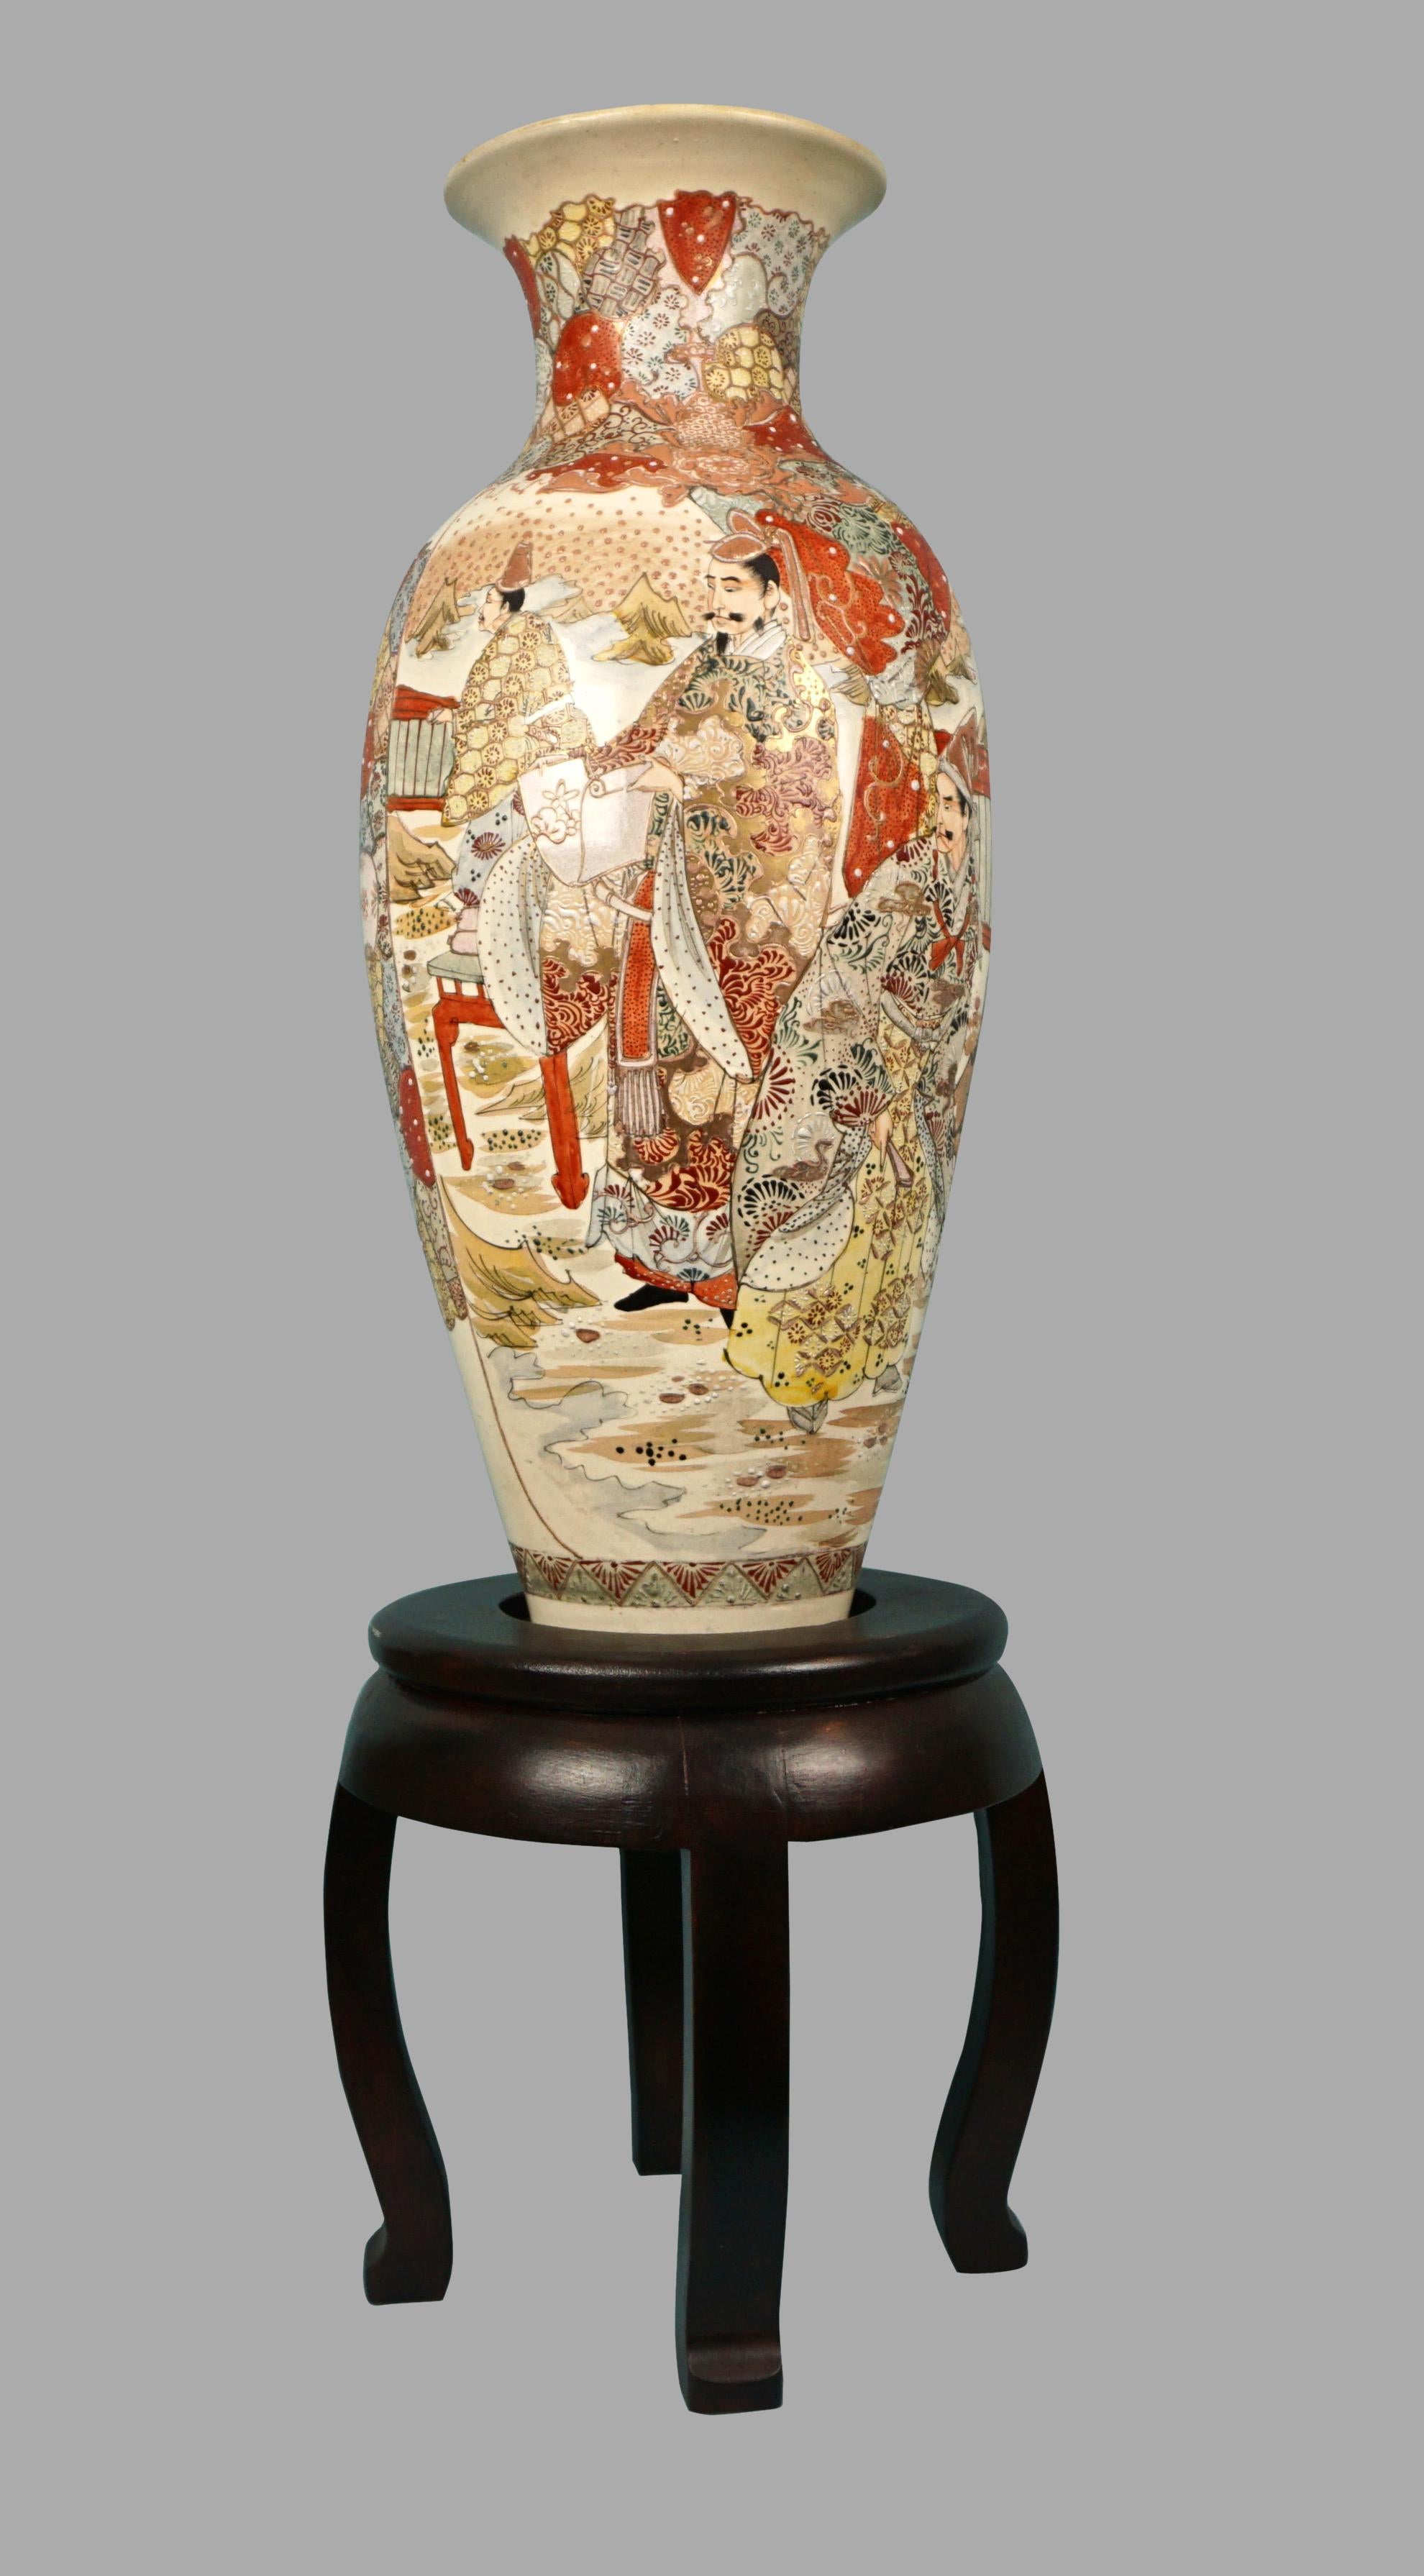 An impressive and large Satsuma enameled earthenware vase decorated overall in tones of orange, yellow, pale green, light brown and black on a cream field with traditionally dresses samurai on one side and elegantly dressed men on the other, all in